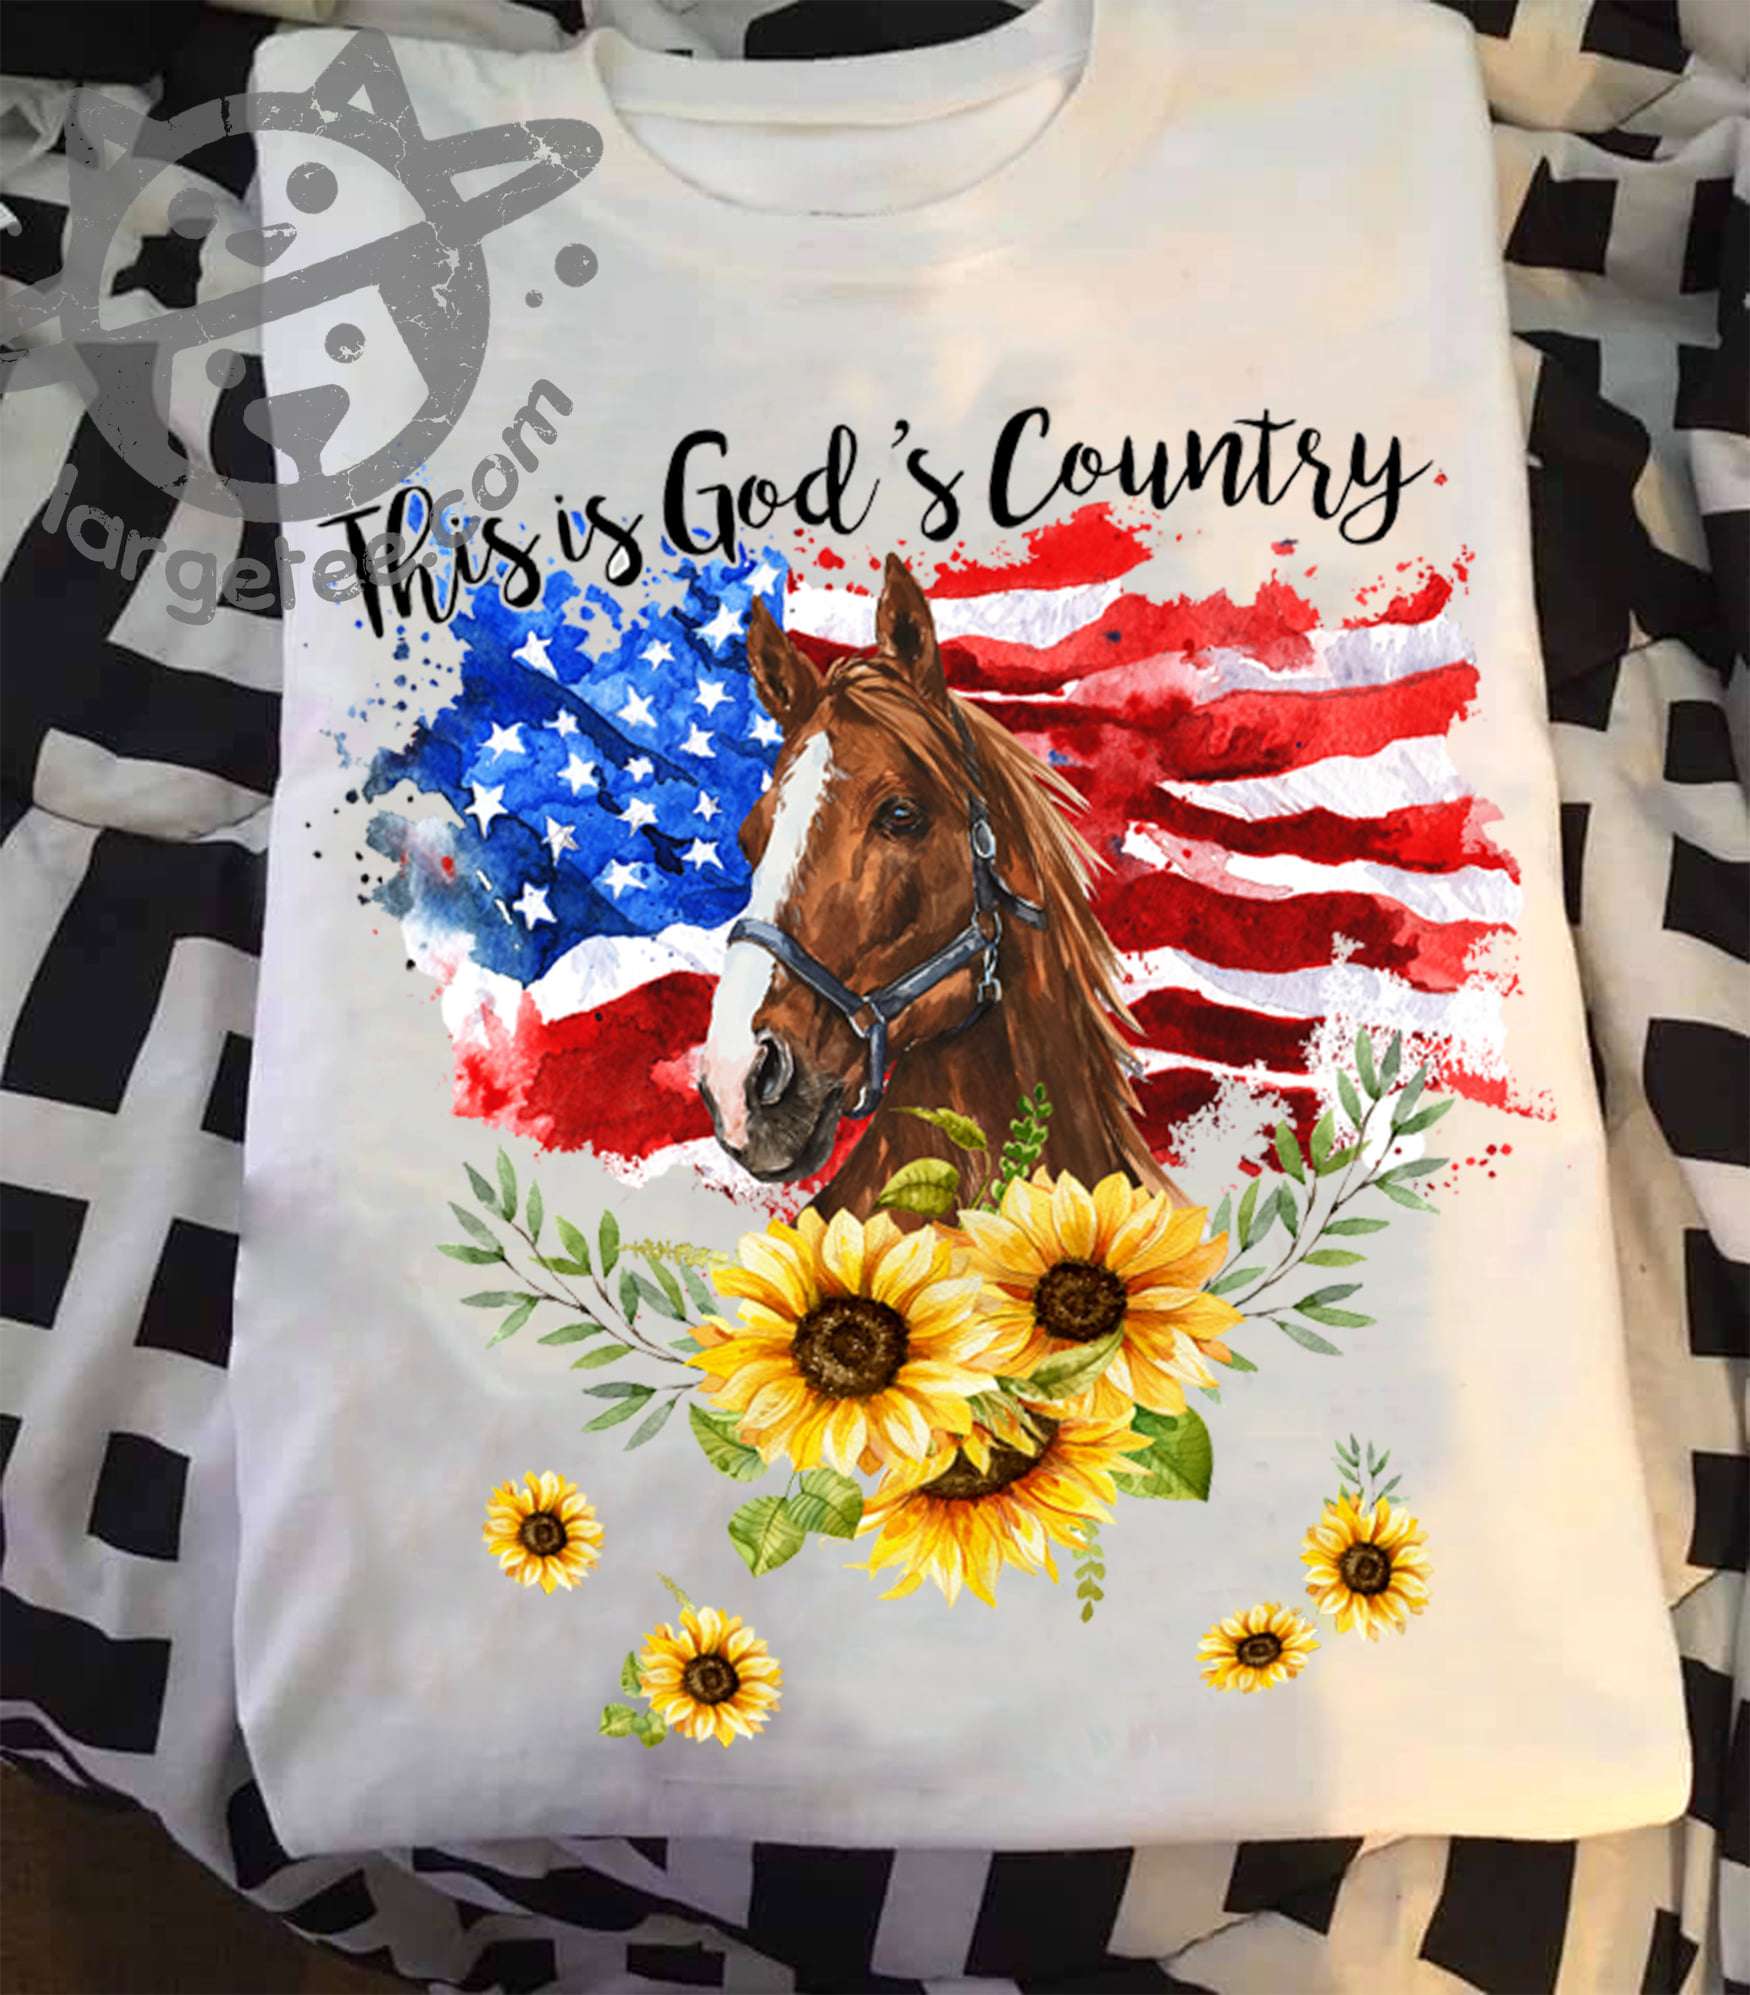 This is god's country - America nation under god, American loves horses